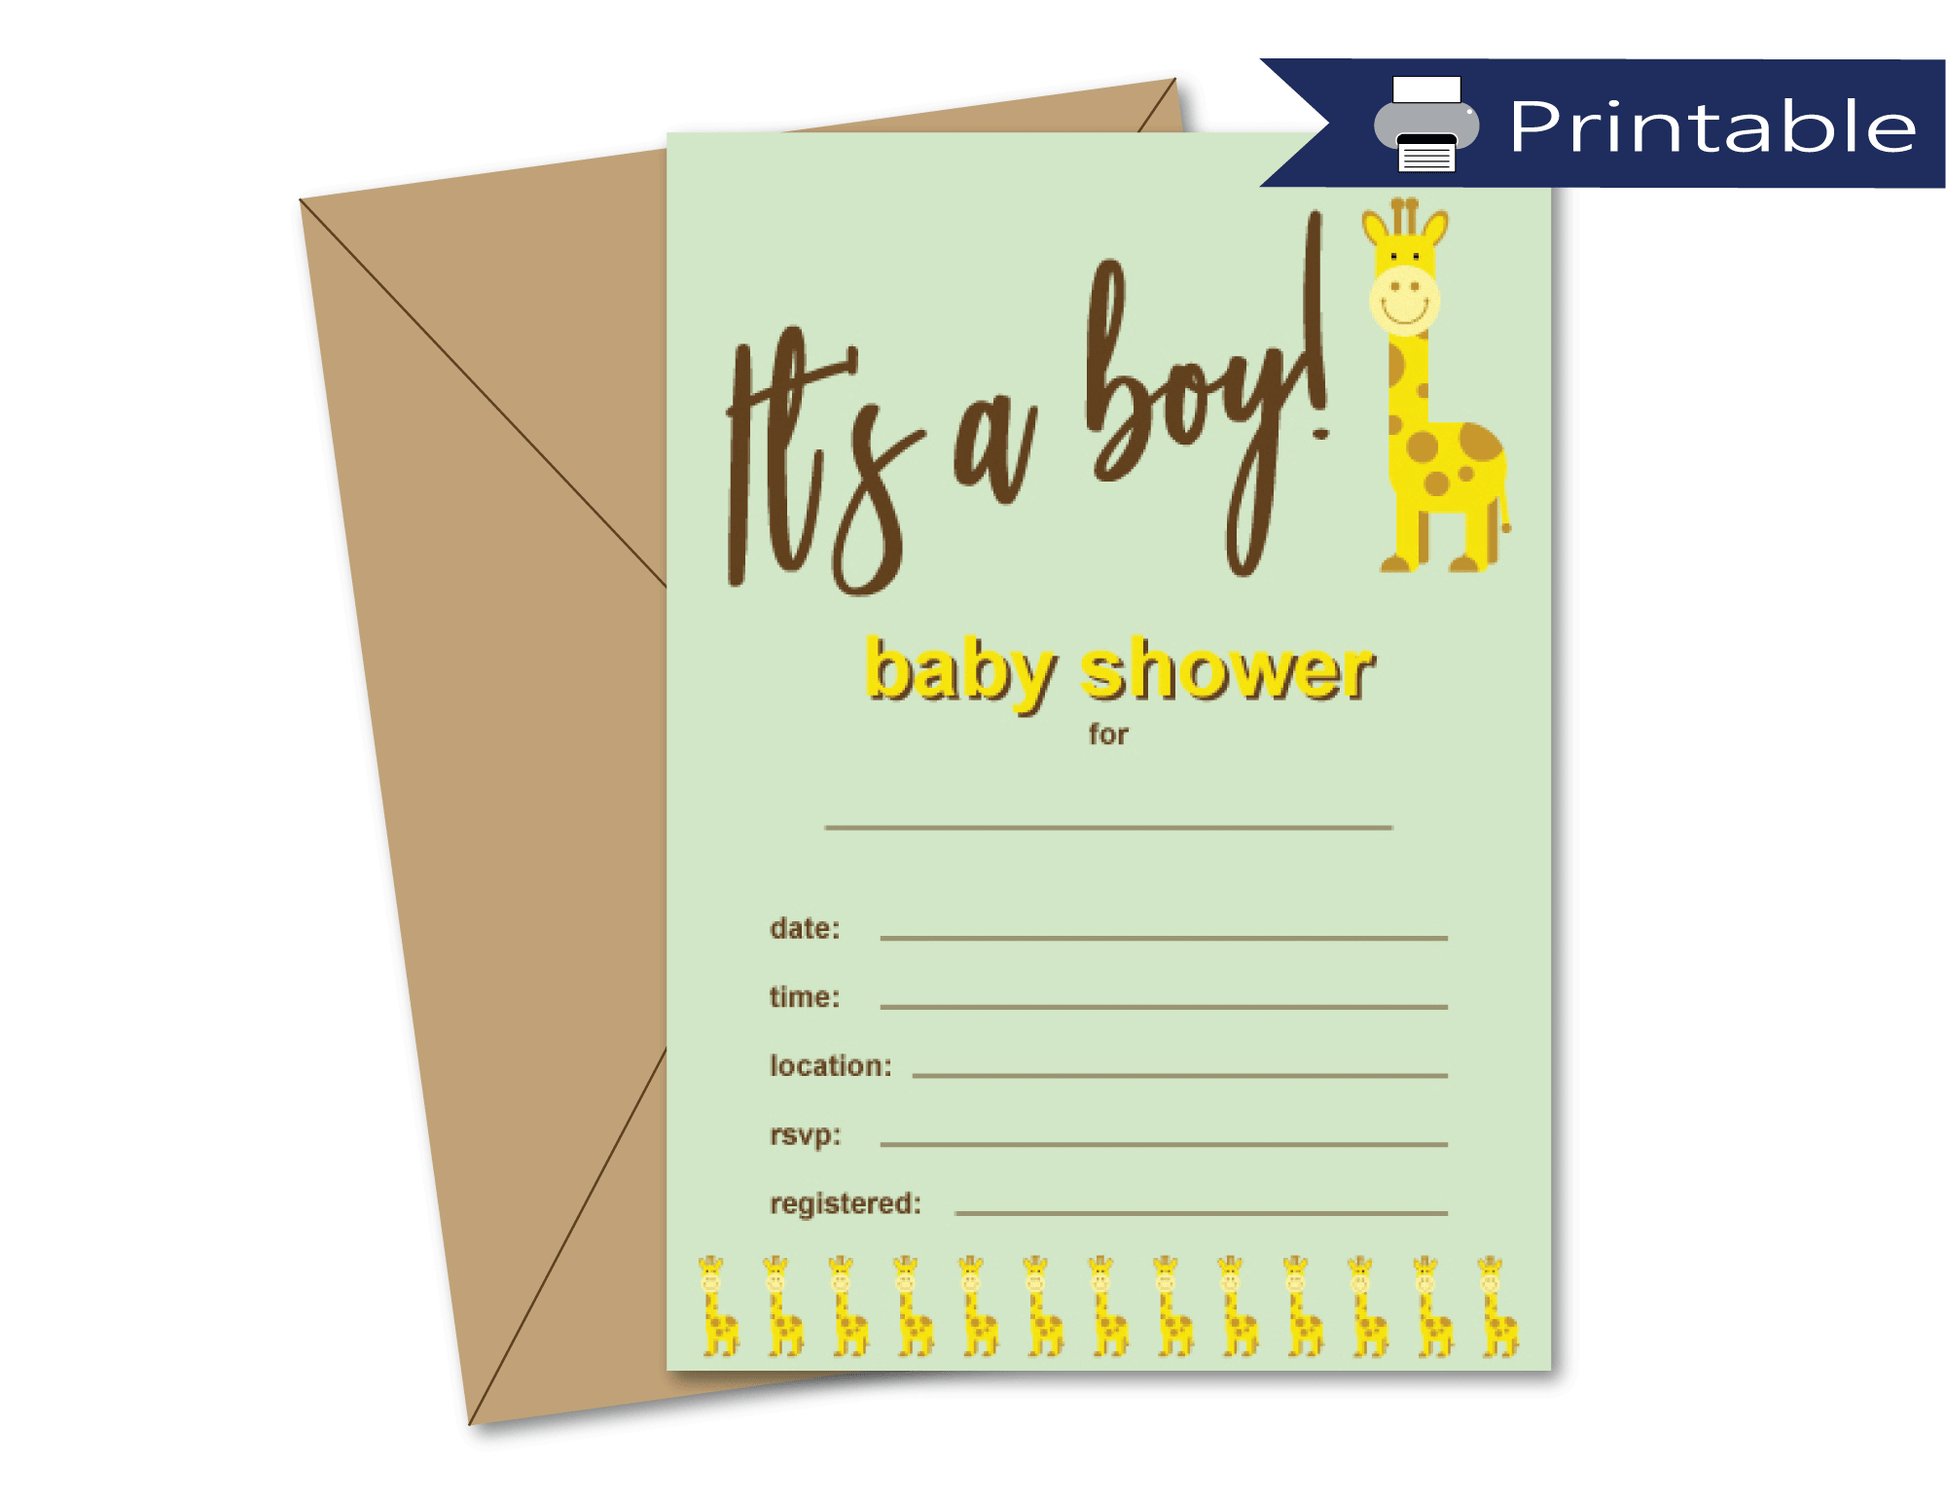 printable baby shower invitation blanks - its a boy invites - DIIY giraffe baby shower invitations